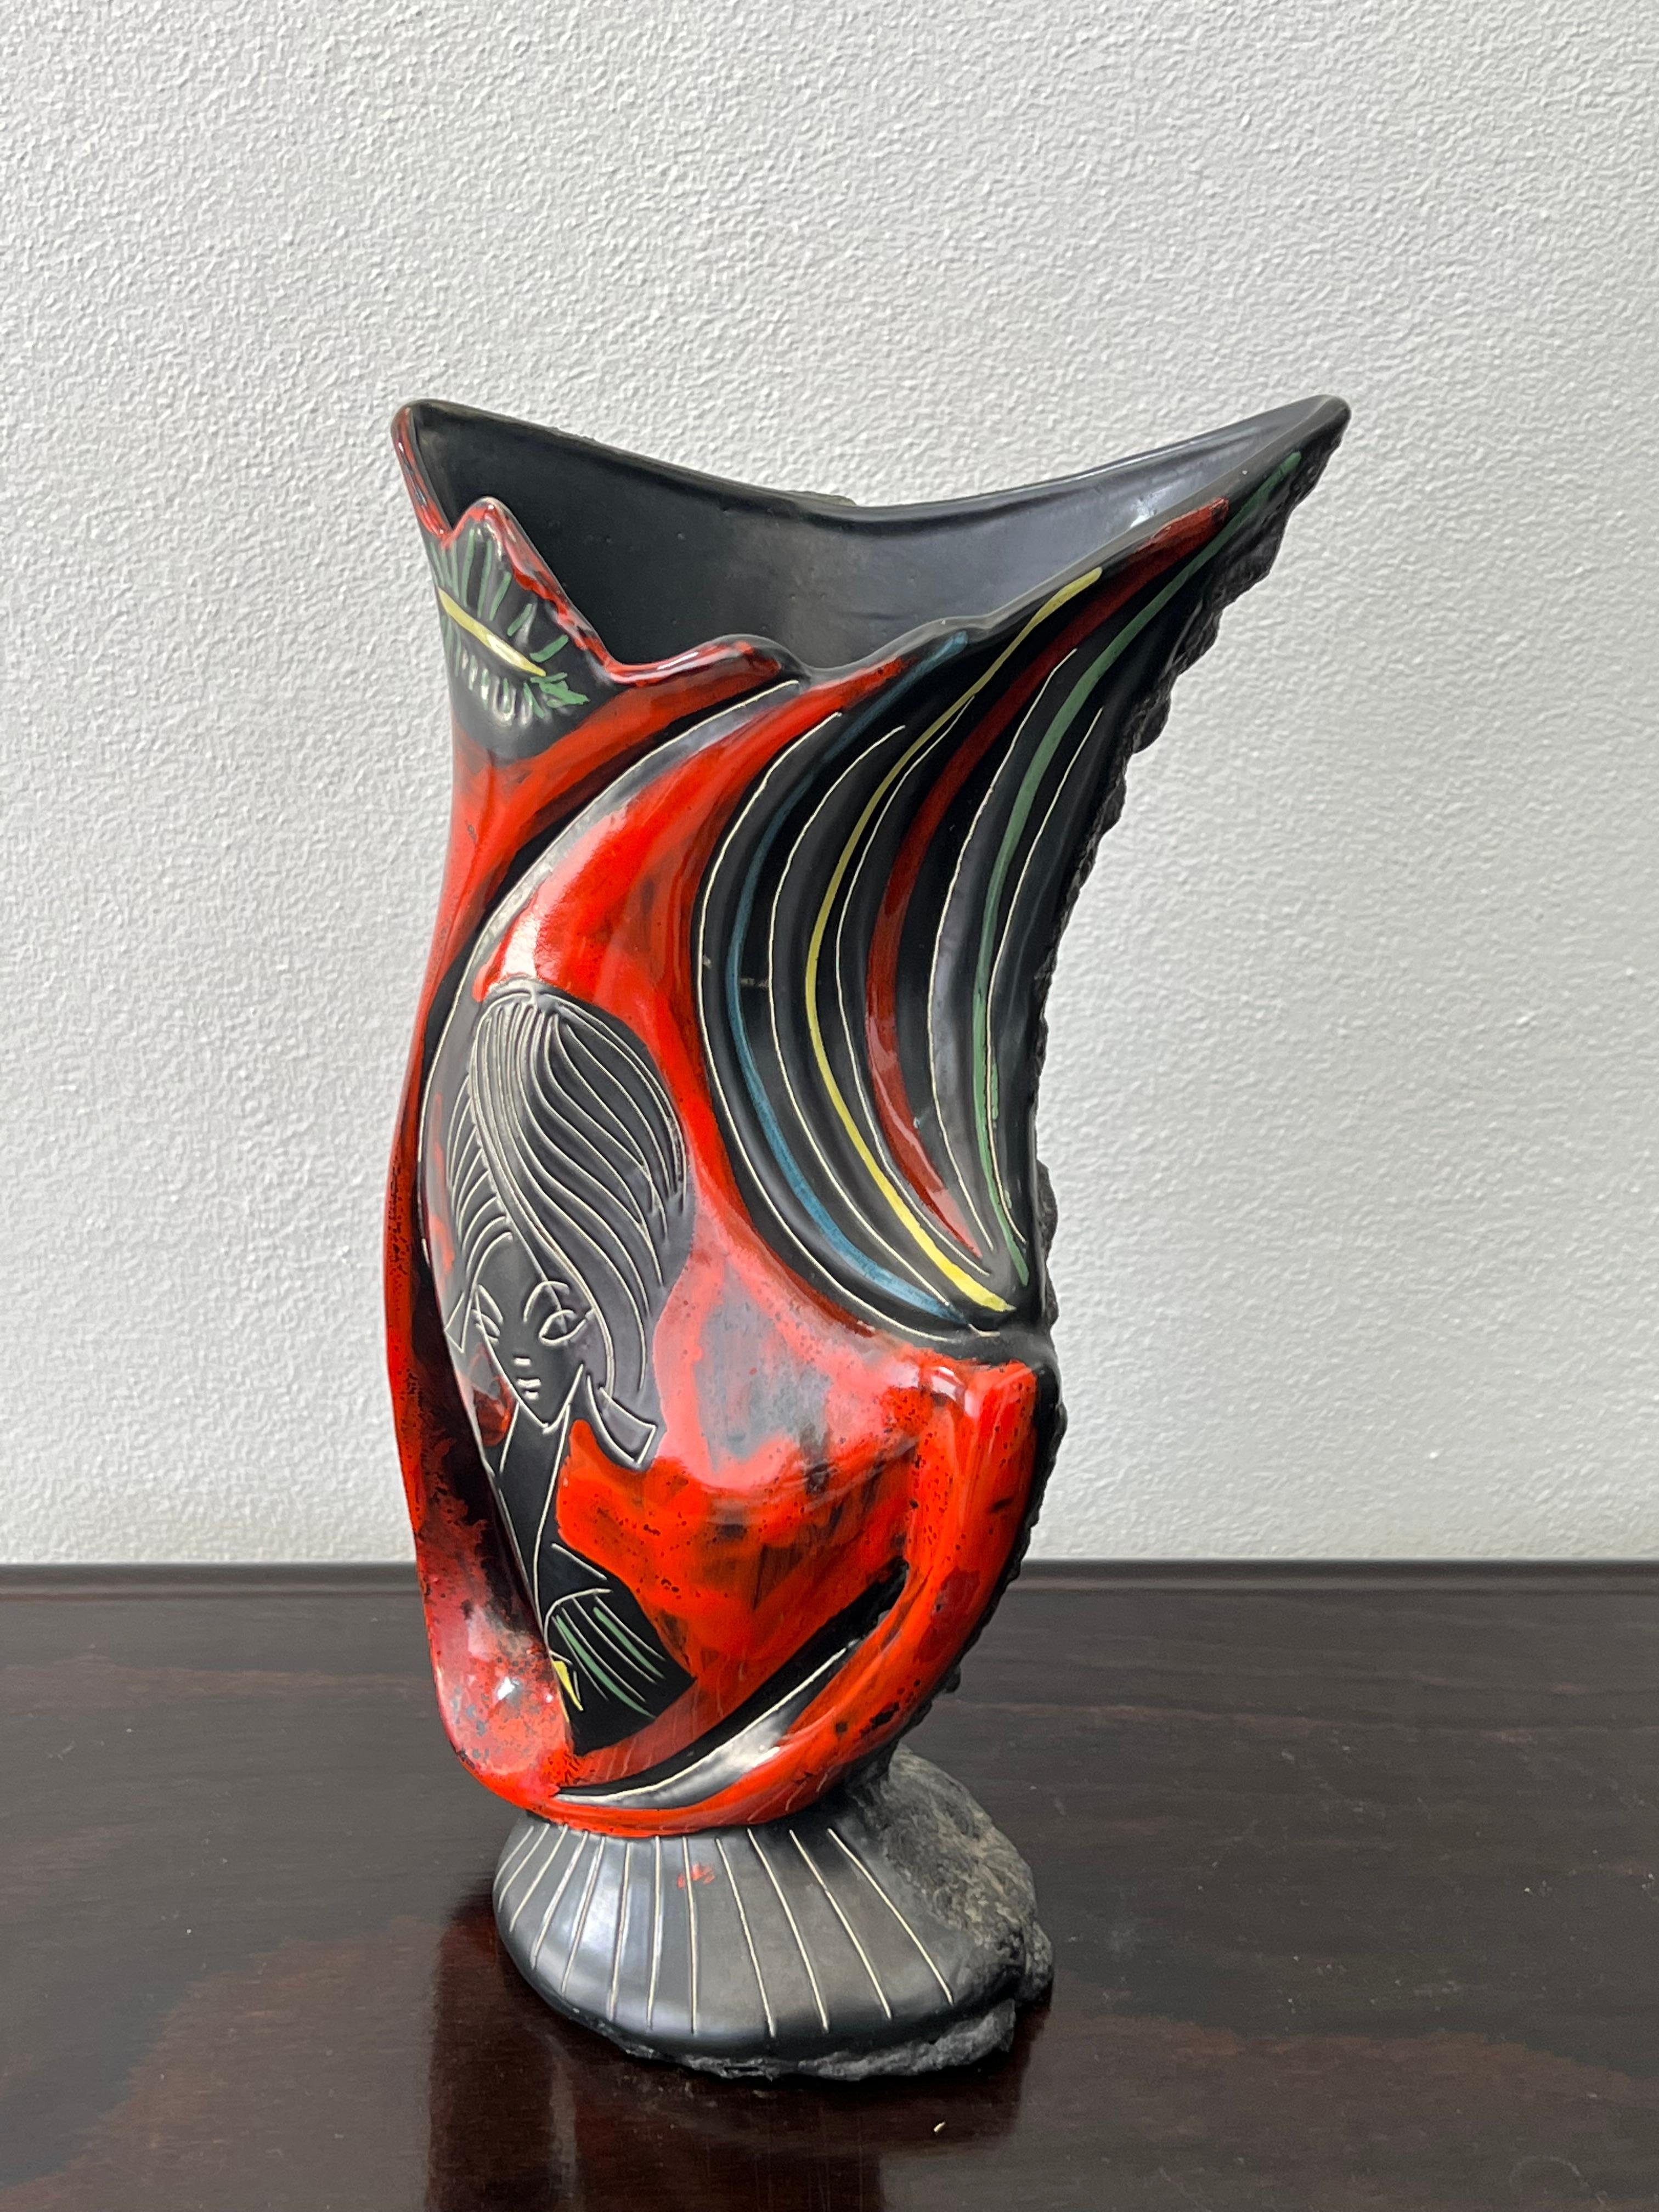 Stunning Italian Augusto Giulianelli for San-Marino Lava vase 1950. Vase in signed as M6 Giulianelli, one side is glazed ceramic the other is ceramic with amazing Lava work.